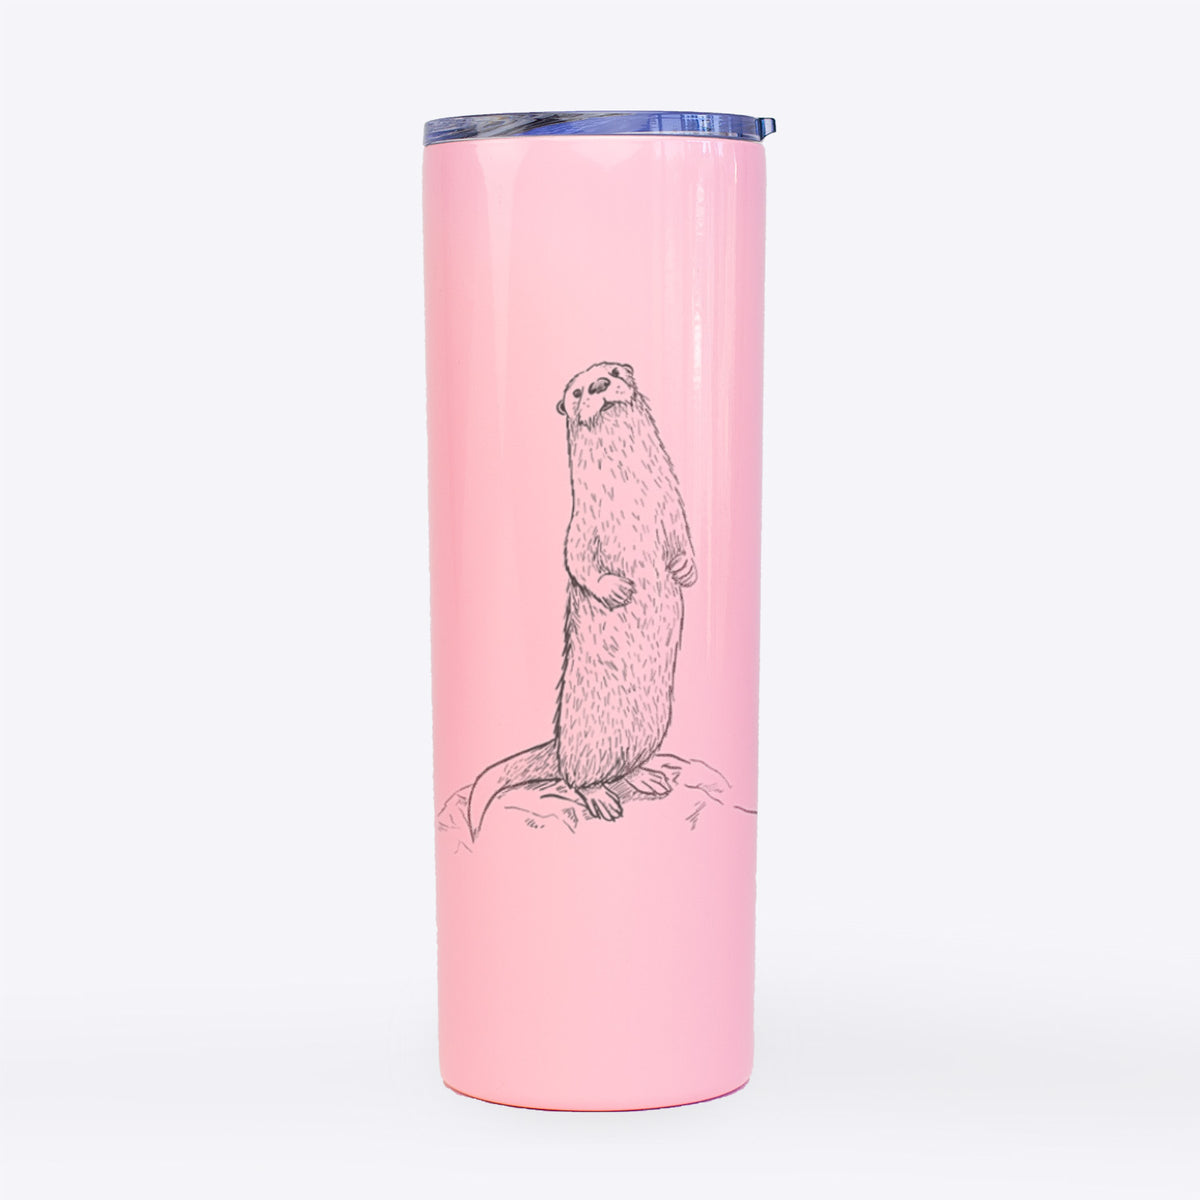 North American River Otter - Lontra canadensis - 20oz Skinny Tumbler